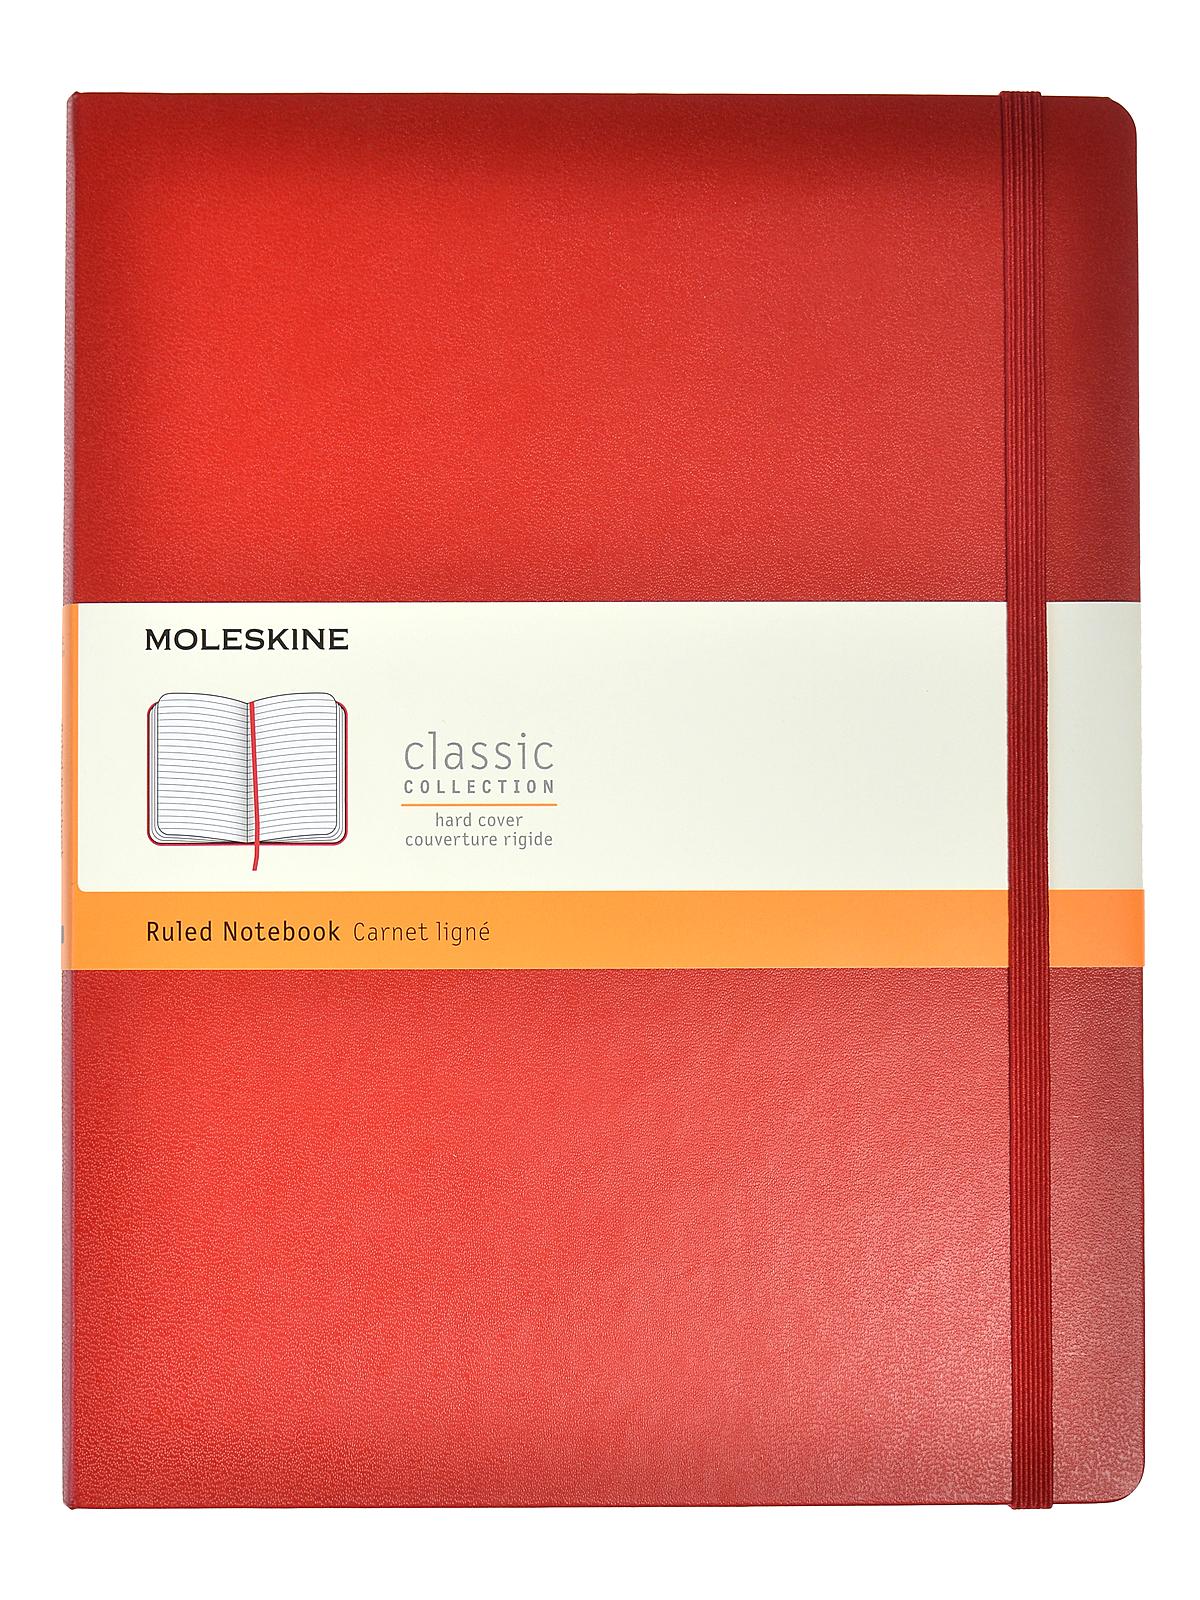 Classic Hard Cover Notebooks Red 7 1 2 In. X 9 3 4 In. 192 Pages, Lined